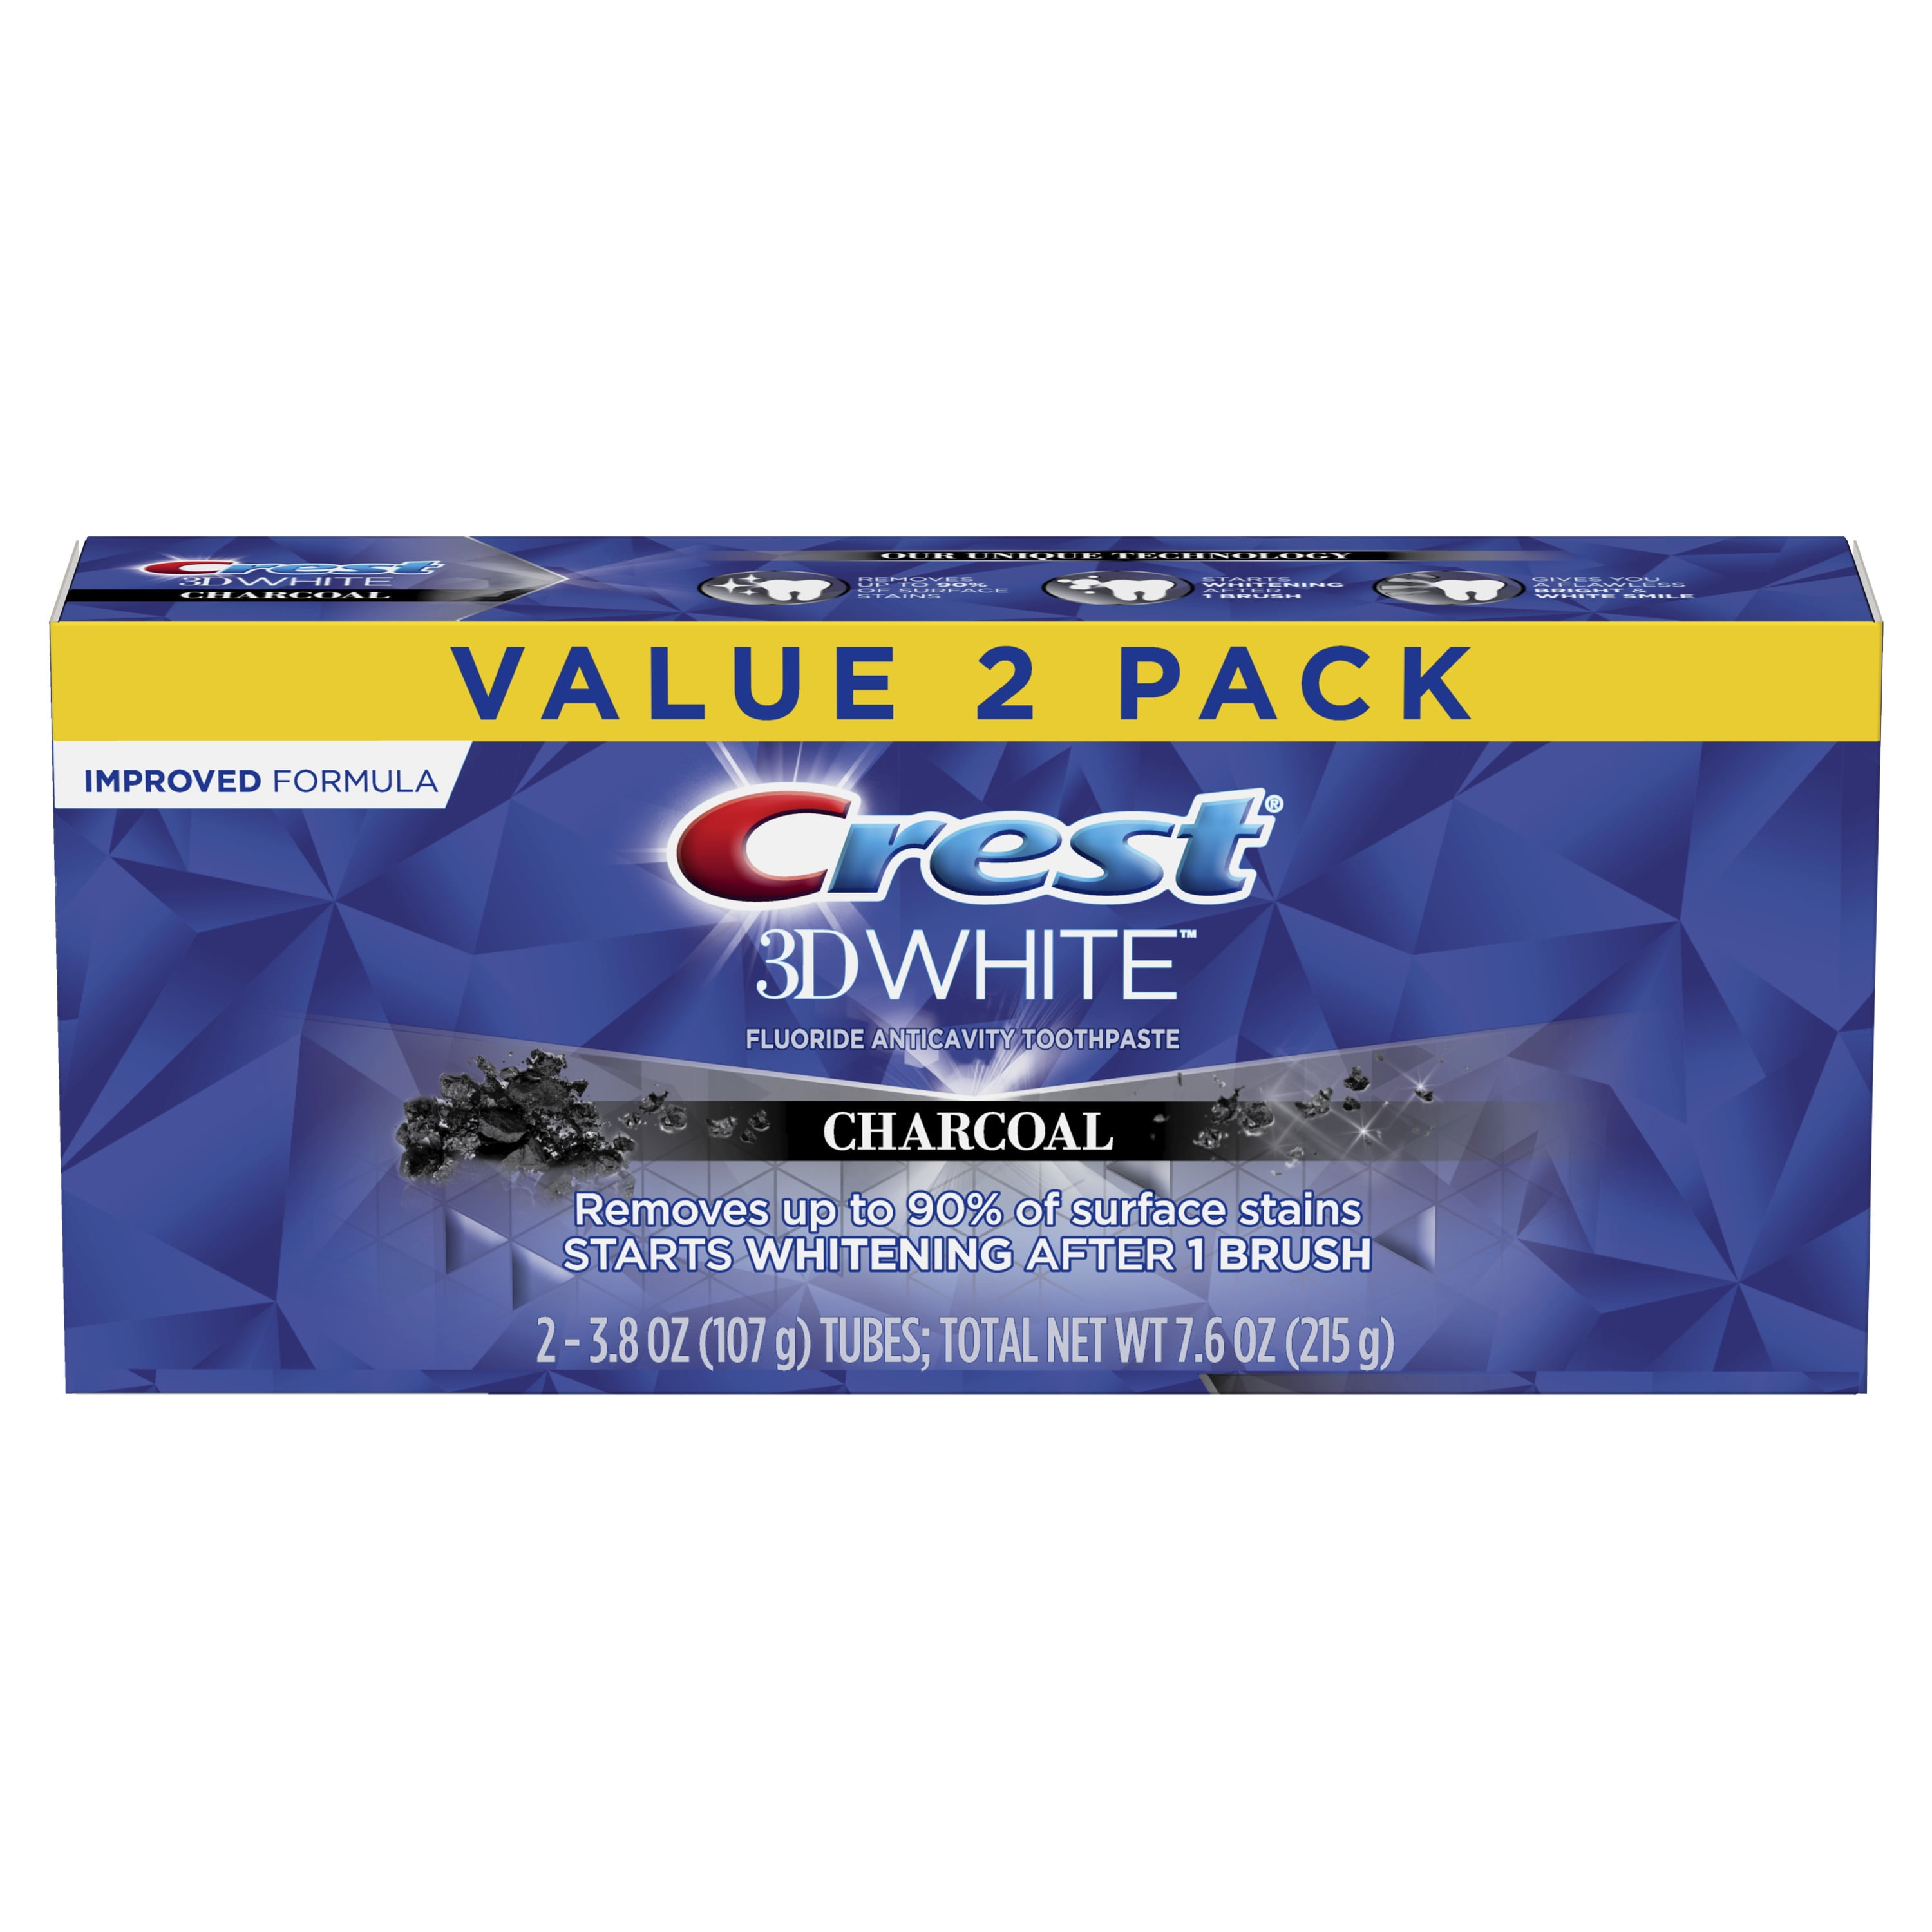 Crest 3D White Charcoal Teeth Whitening Toothpaste, 3.8 oz, 2 Pack